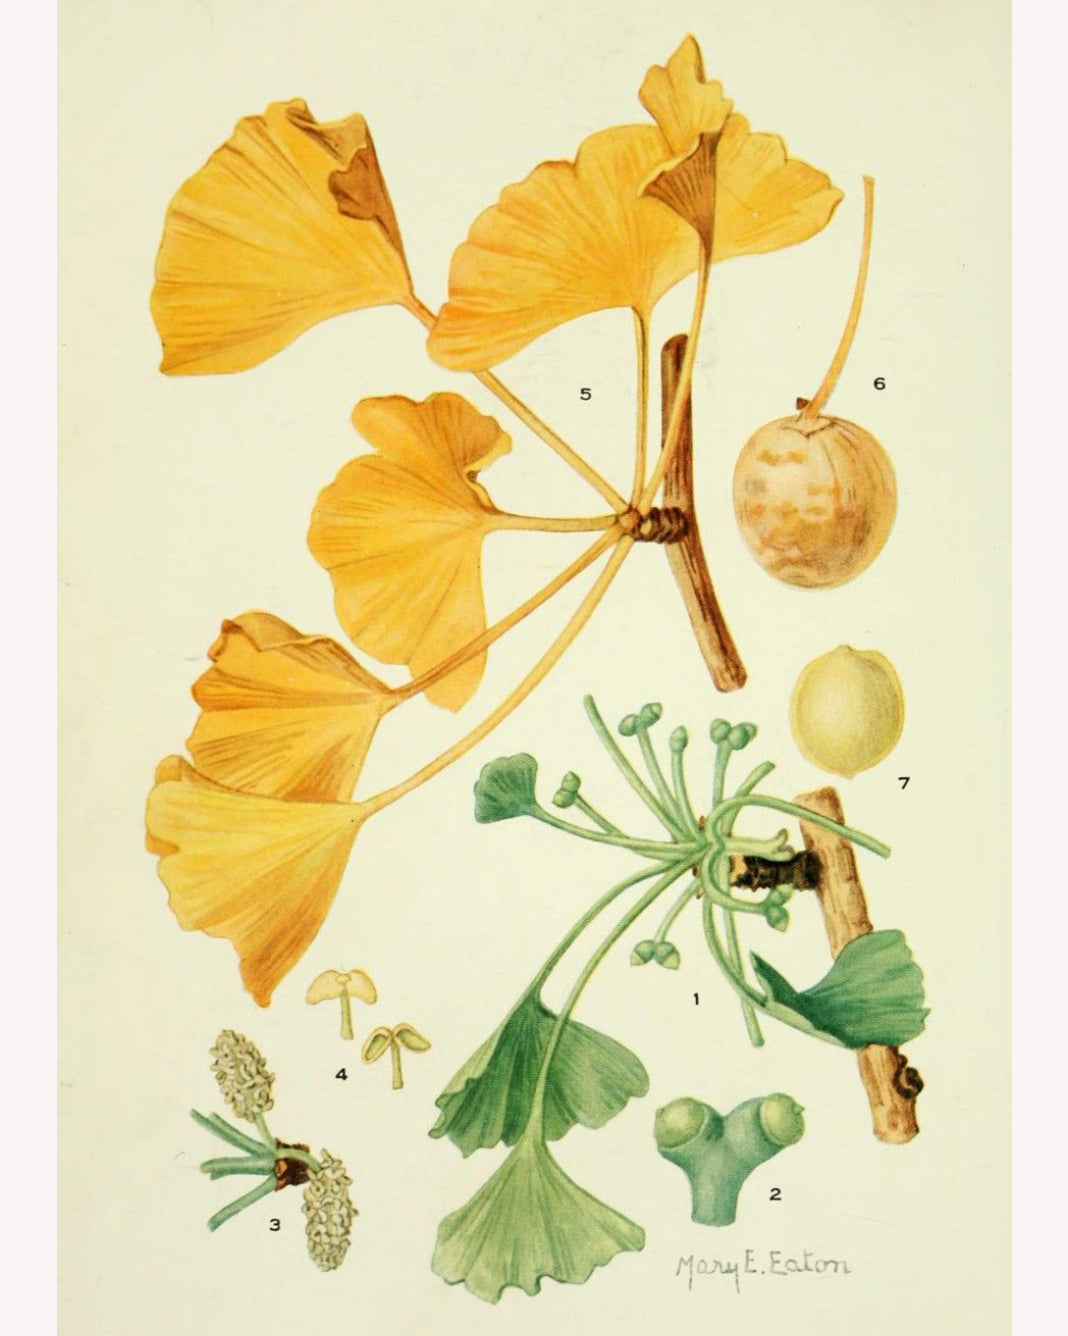 Antique botanical illustration showing the nuts and fan-shaped leaves of the ginko tree, including their golden autumn color.